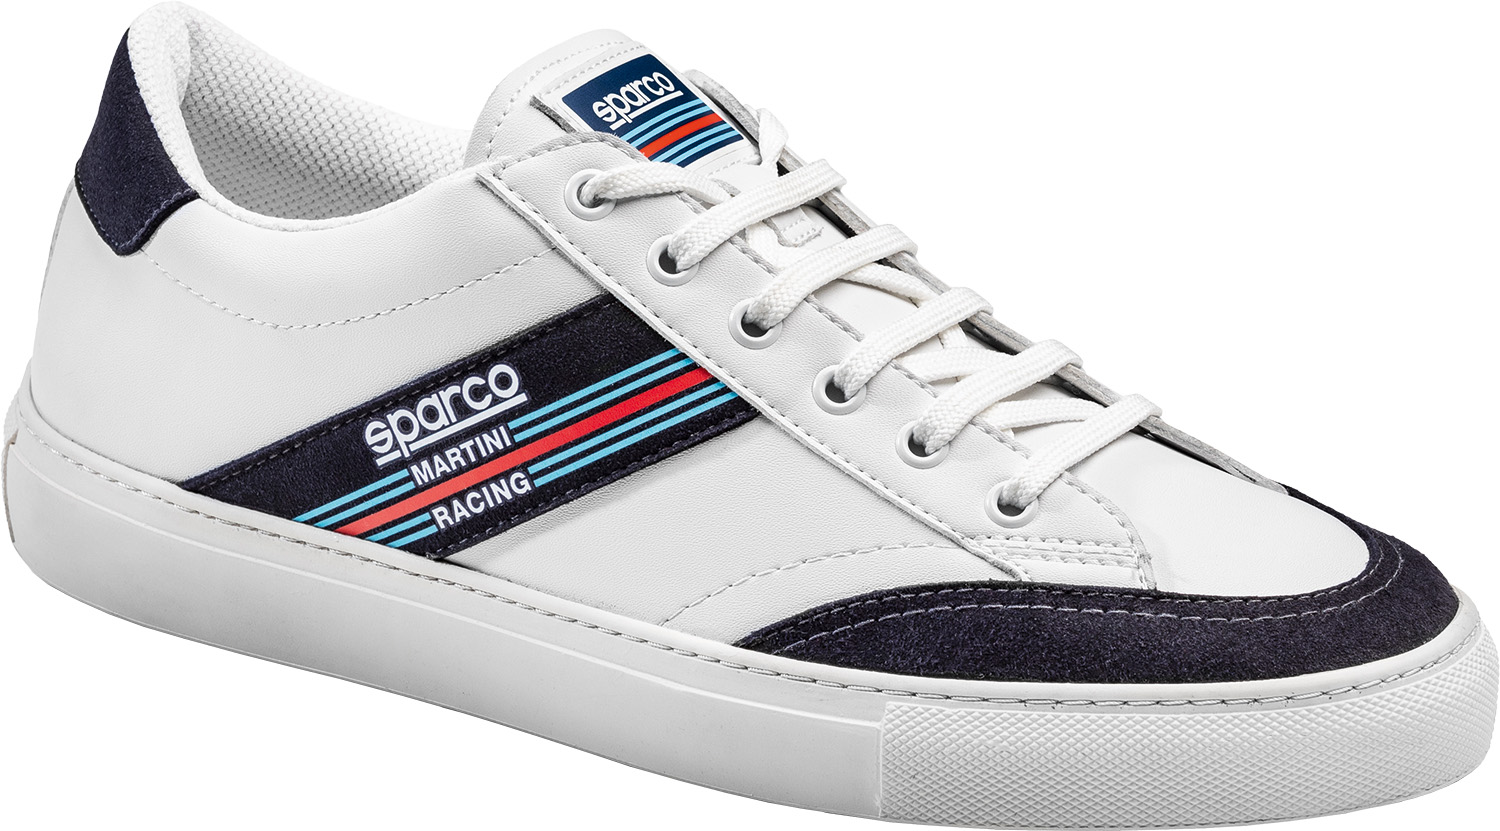 Sparco Sneaker S-TIME Martini Racing